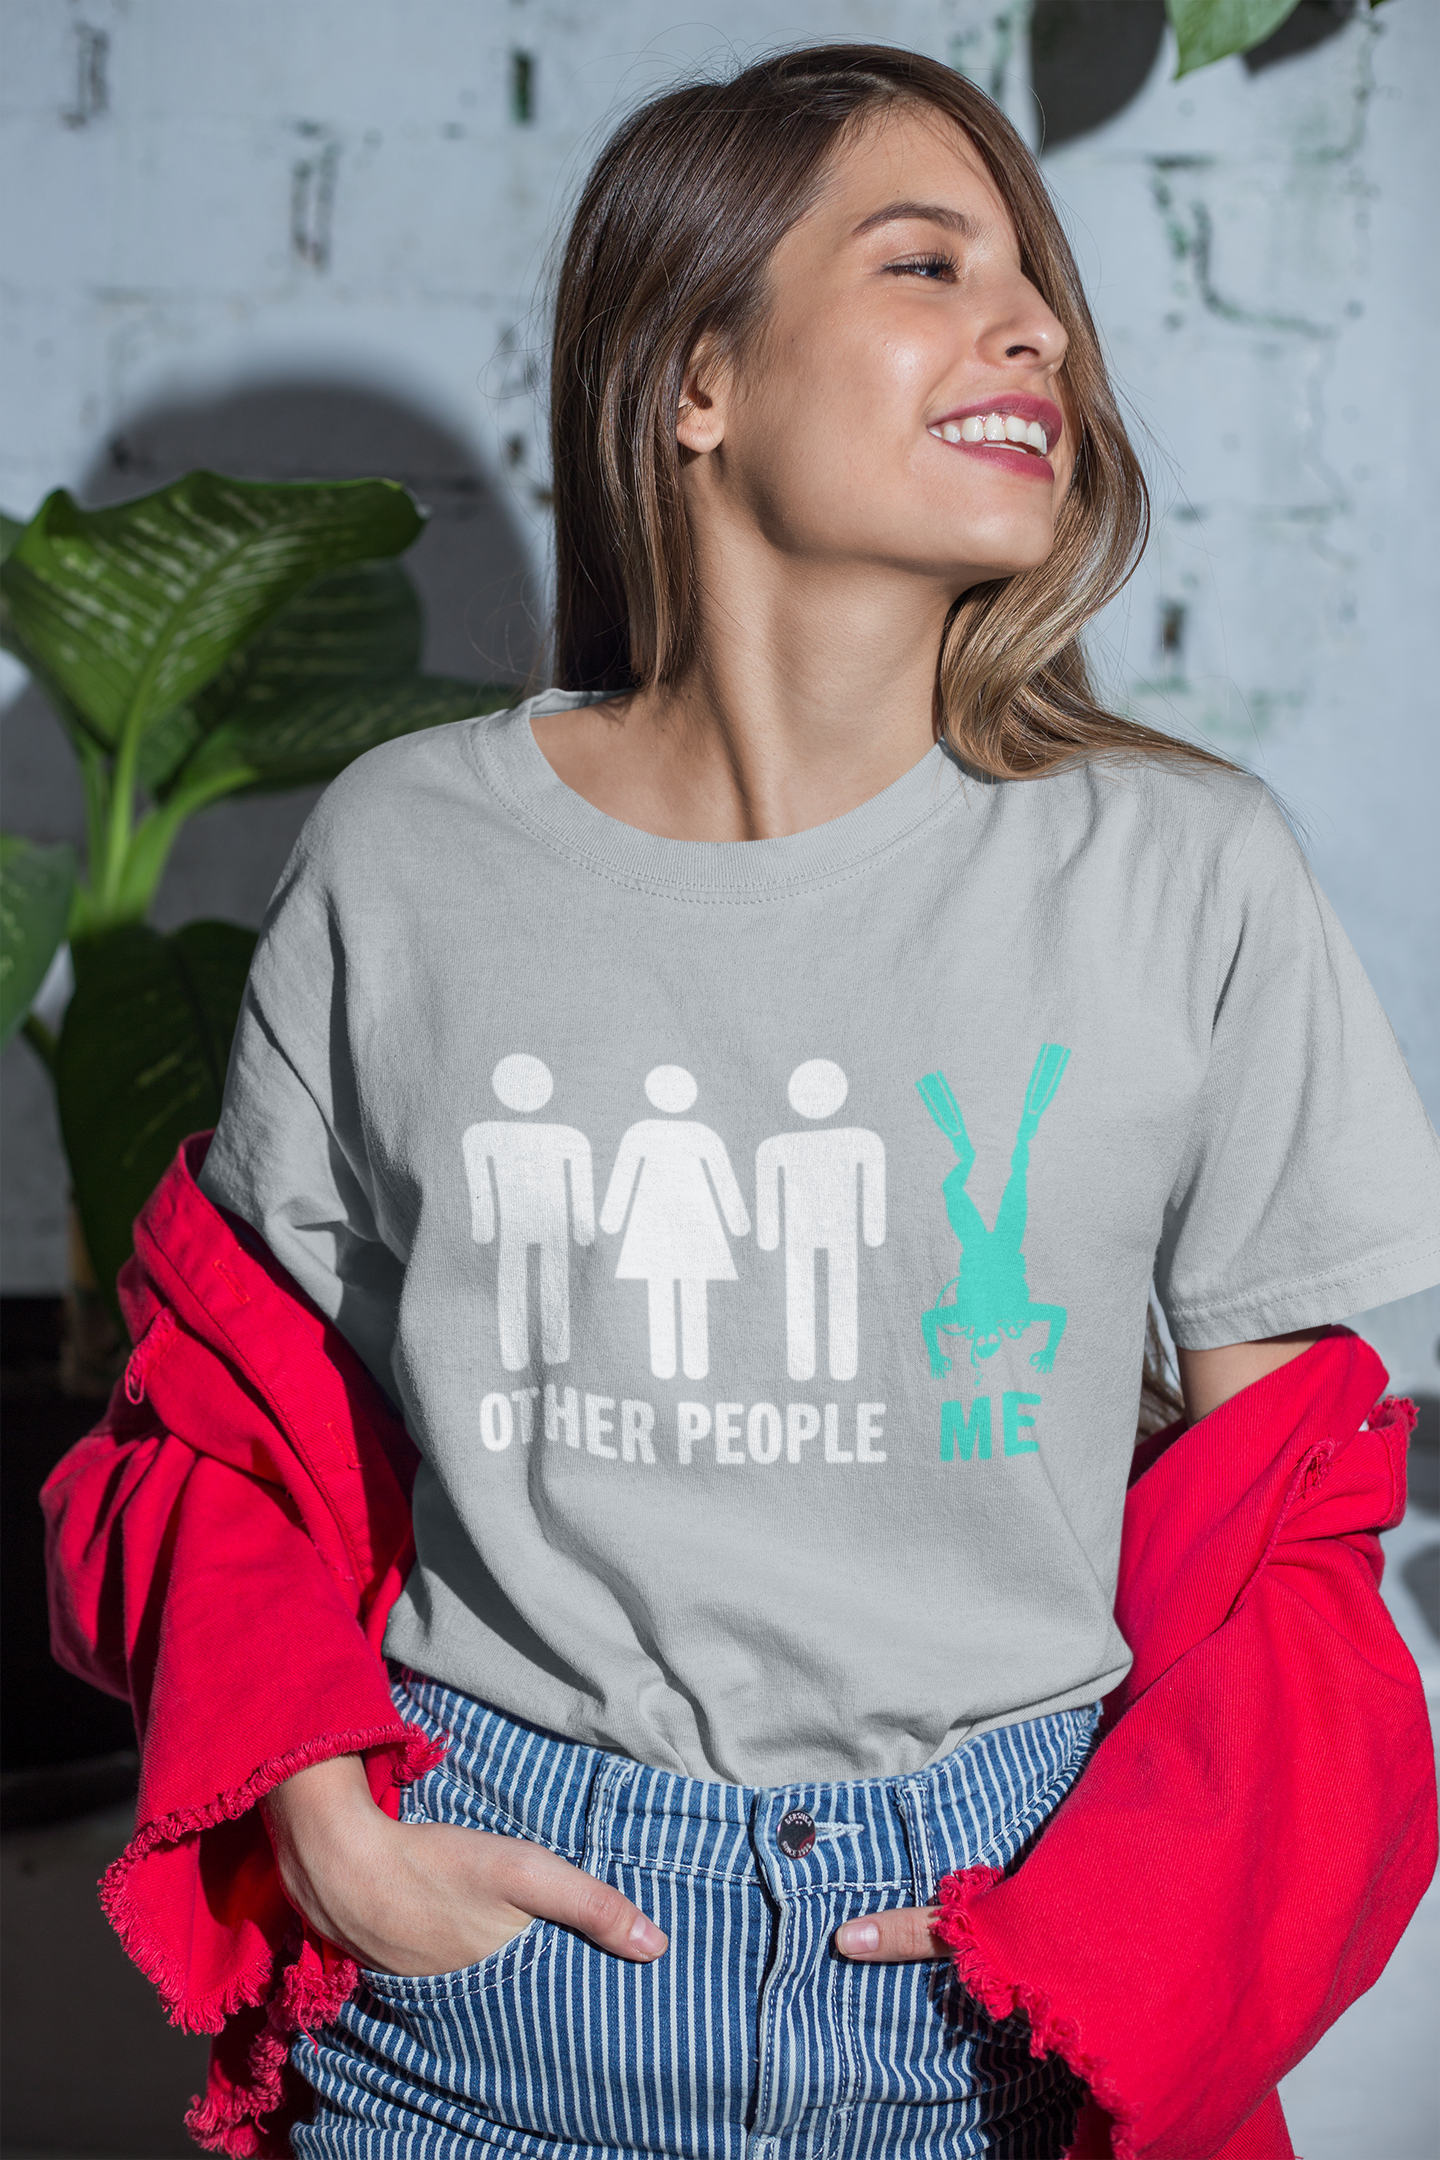 Other people Me scuba diving novelty t-shirt worn by smiling woman